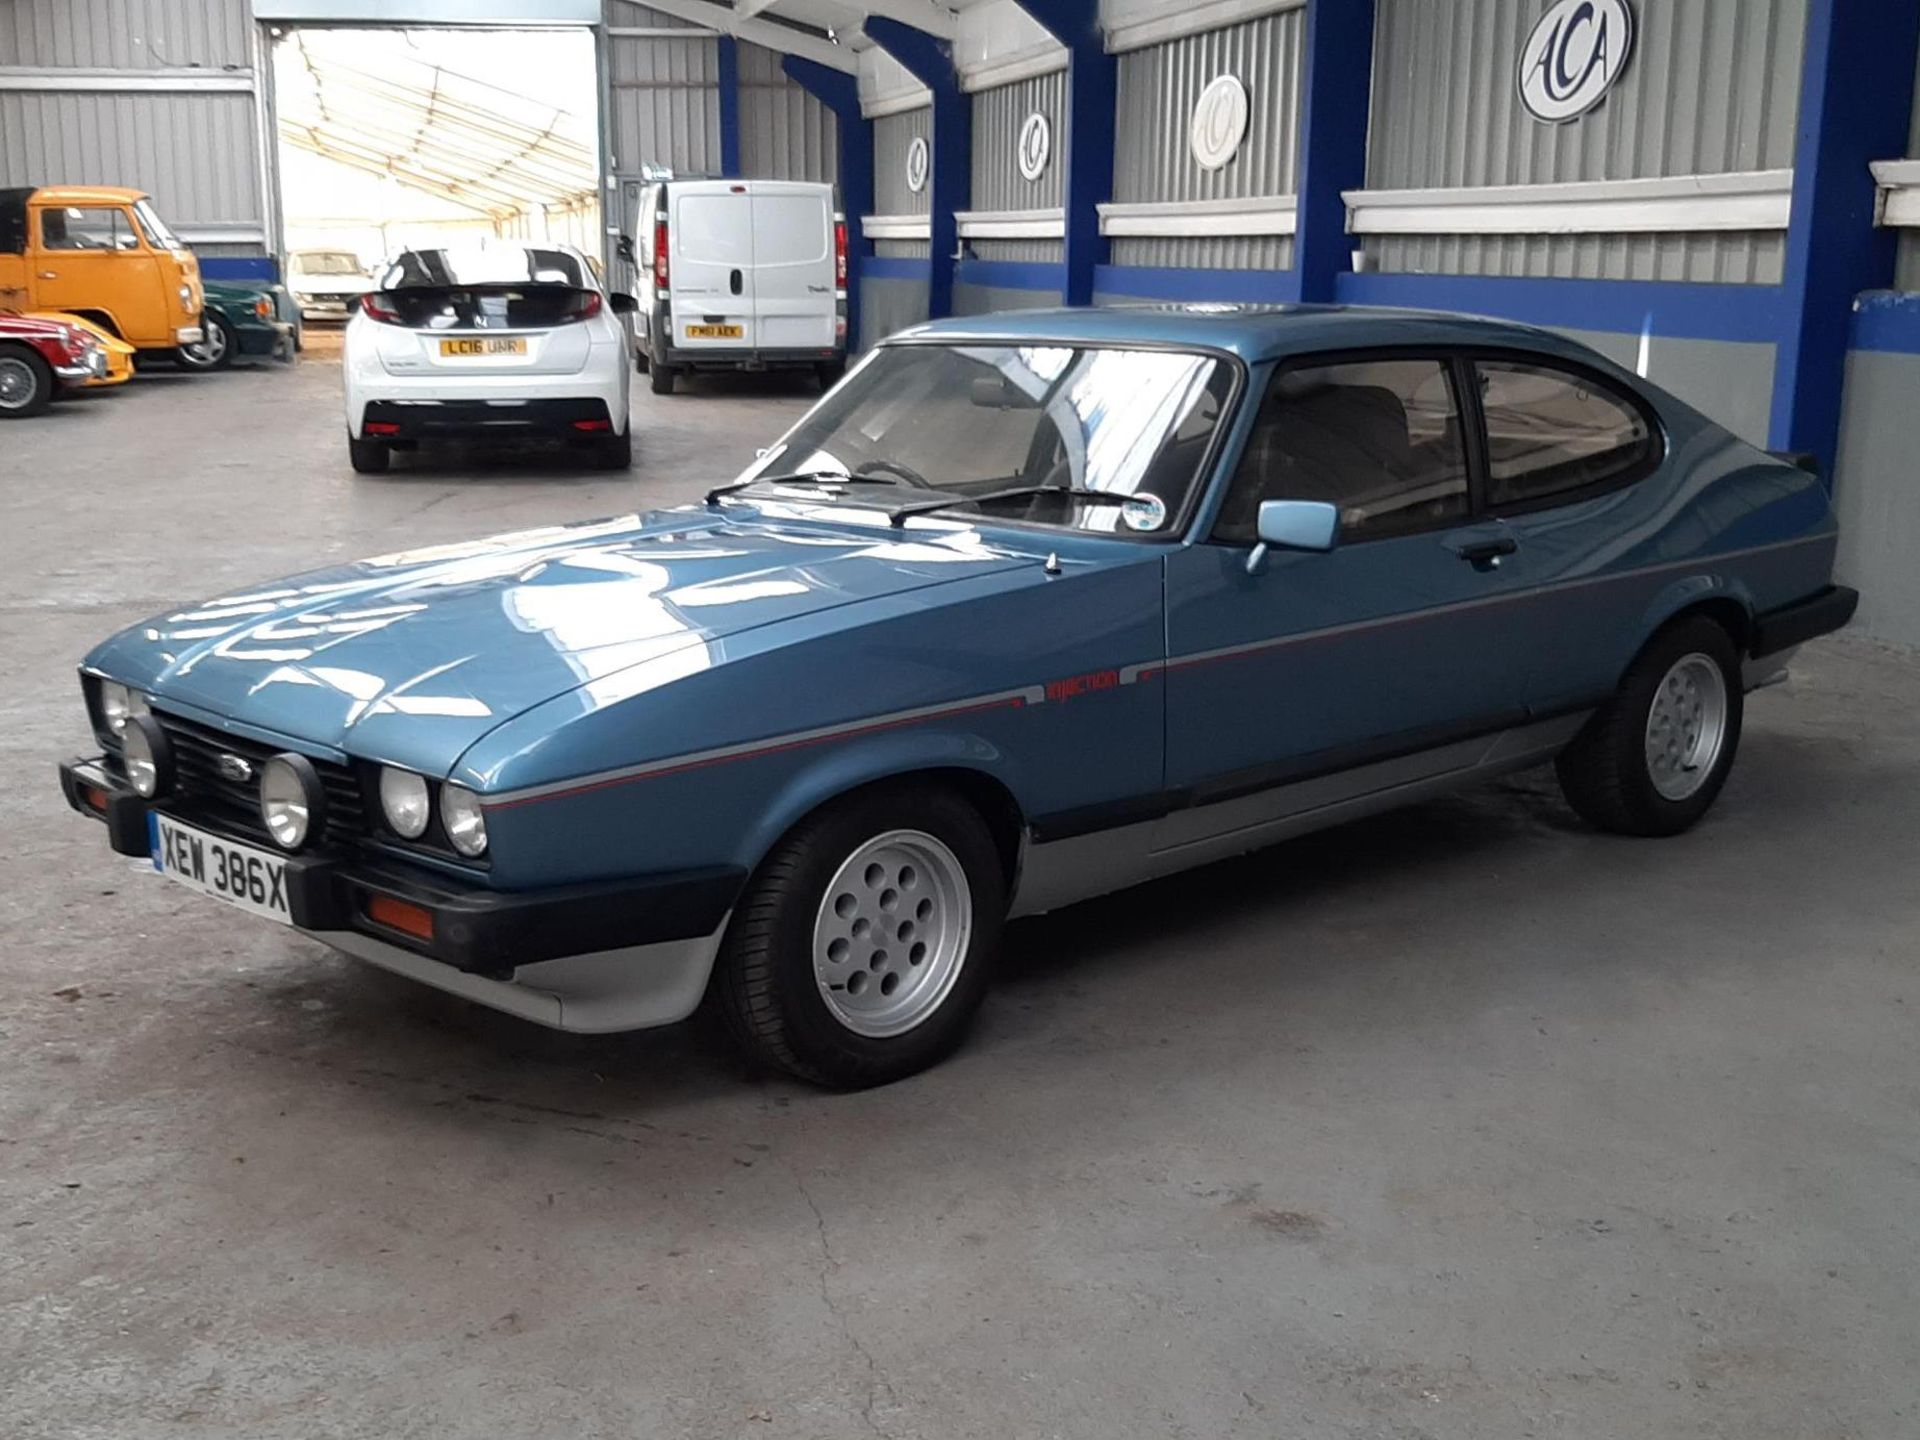 1982 Ford Capri 2.8 Injection - Image 3 of 23